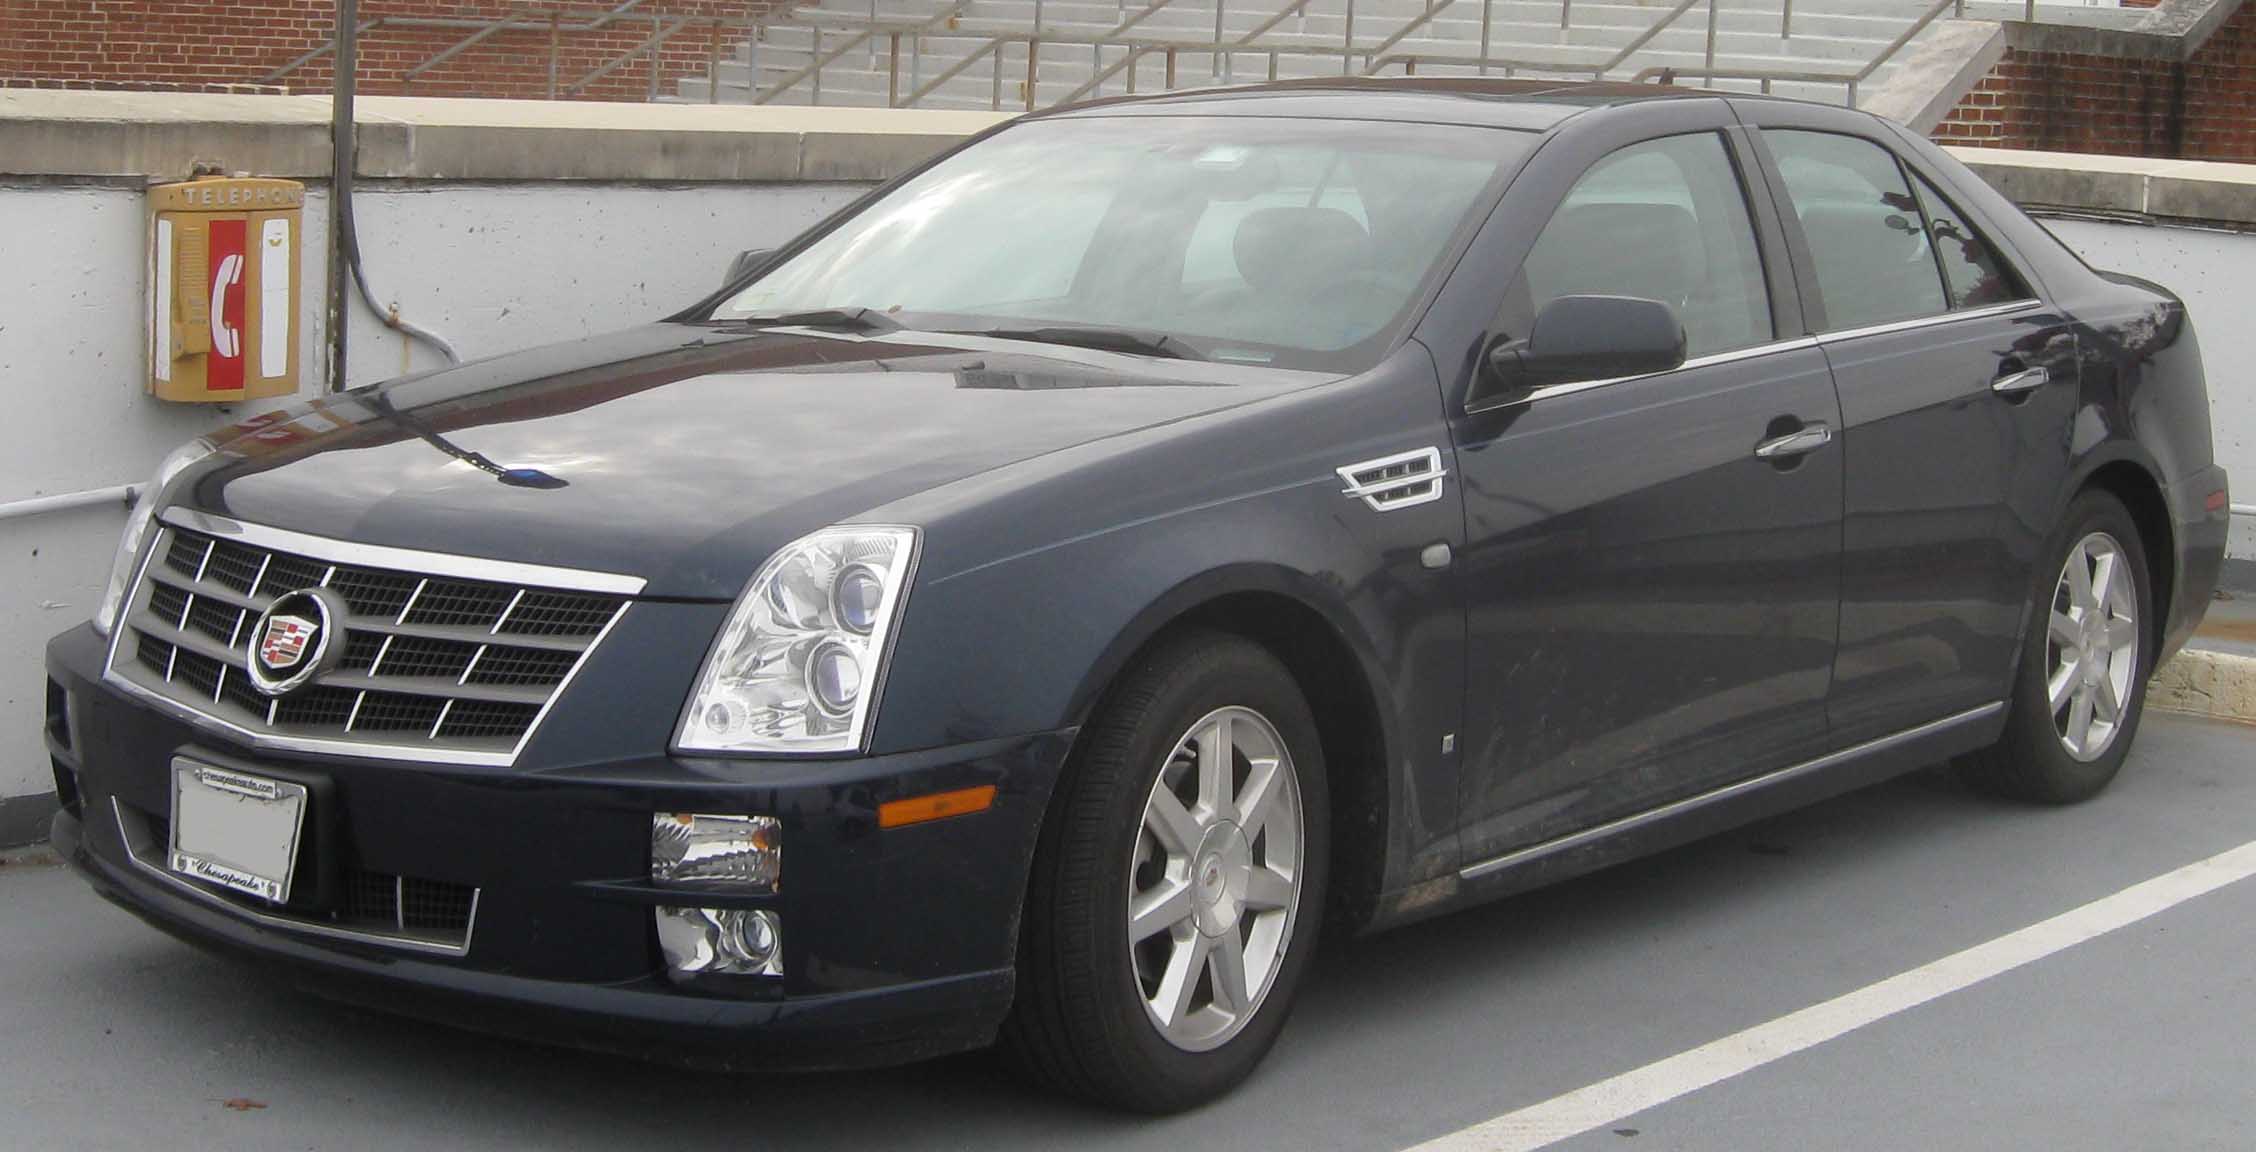 File:2008-2009 Cadillac STS.jpg - Wikimedia Commons